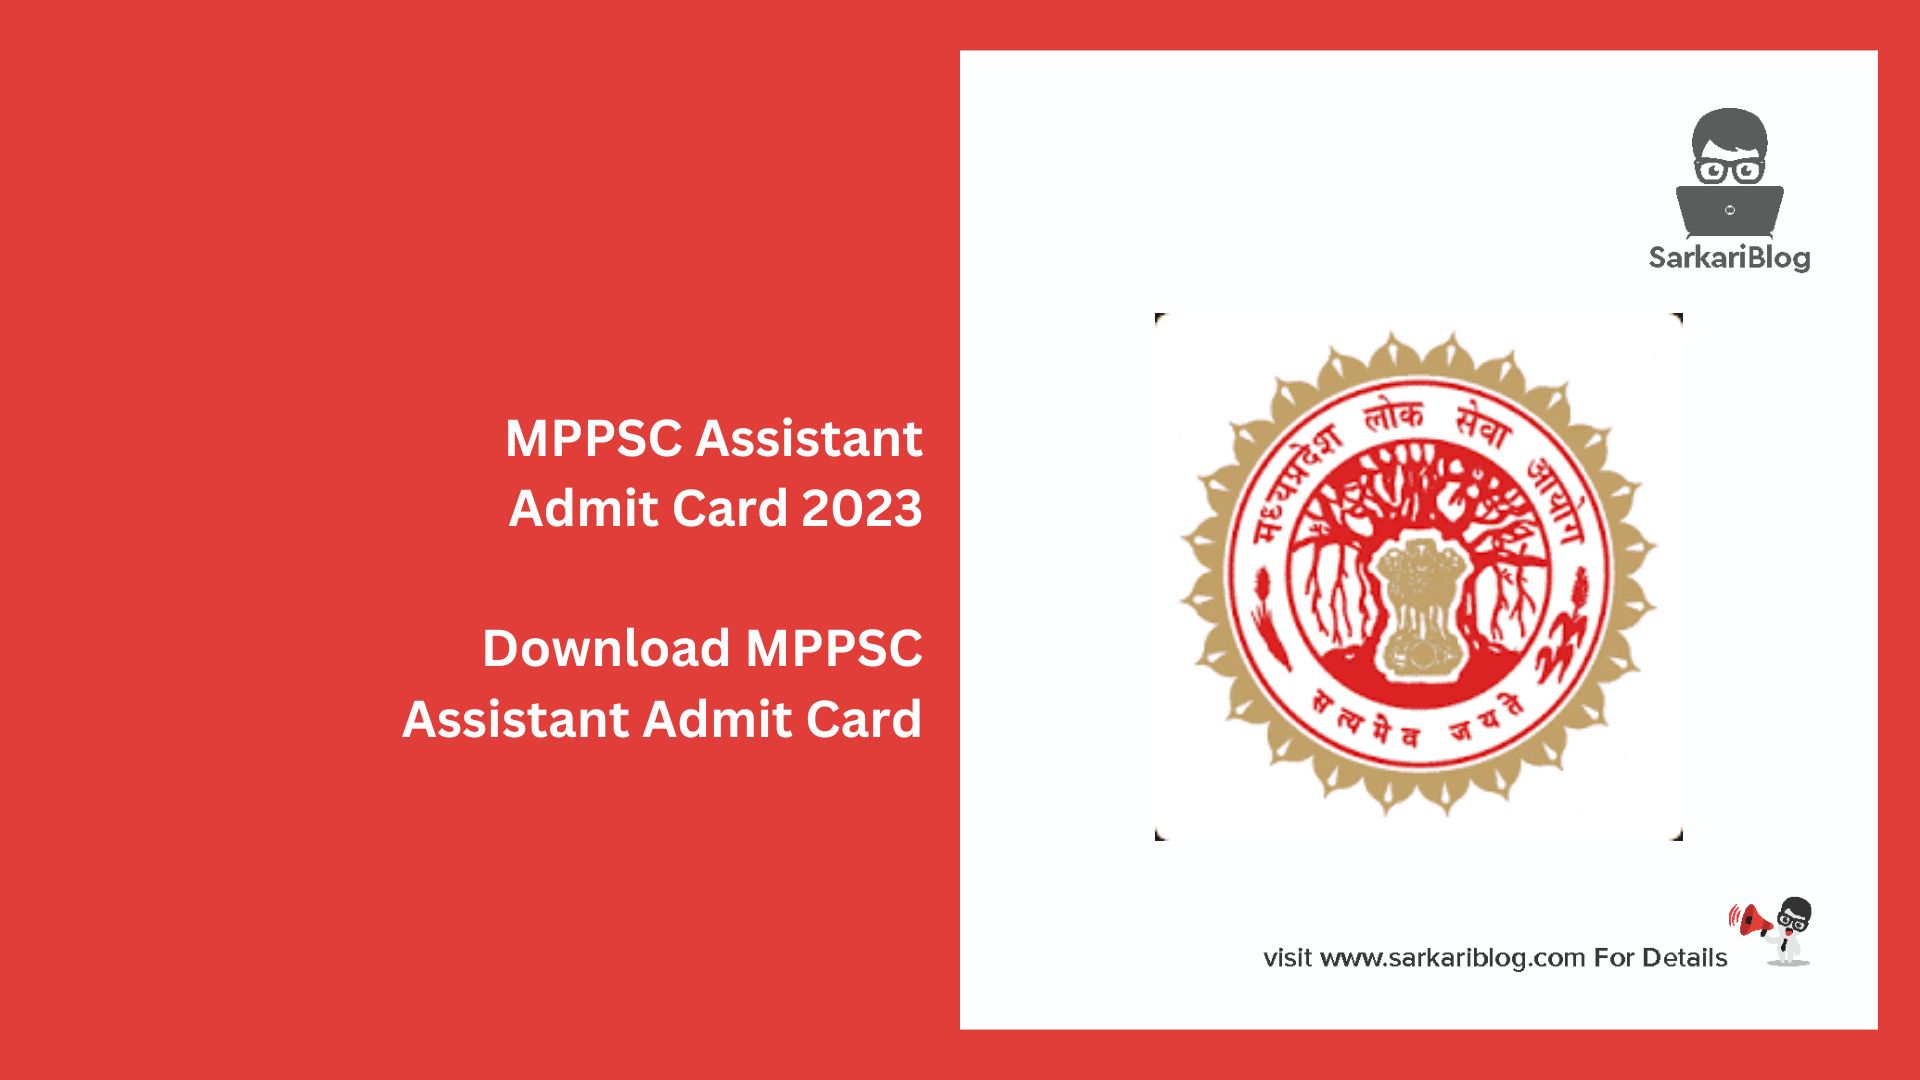 MPPSC Assistant Admit Card 2023